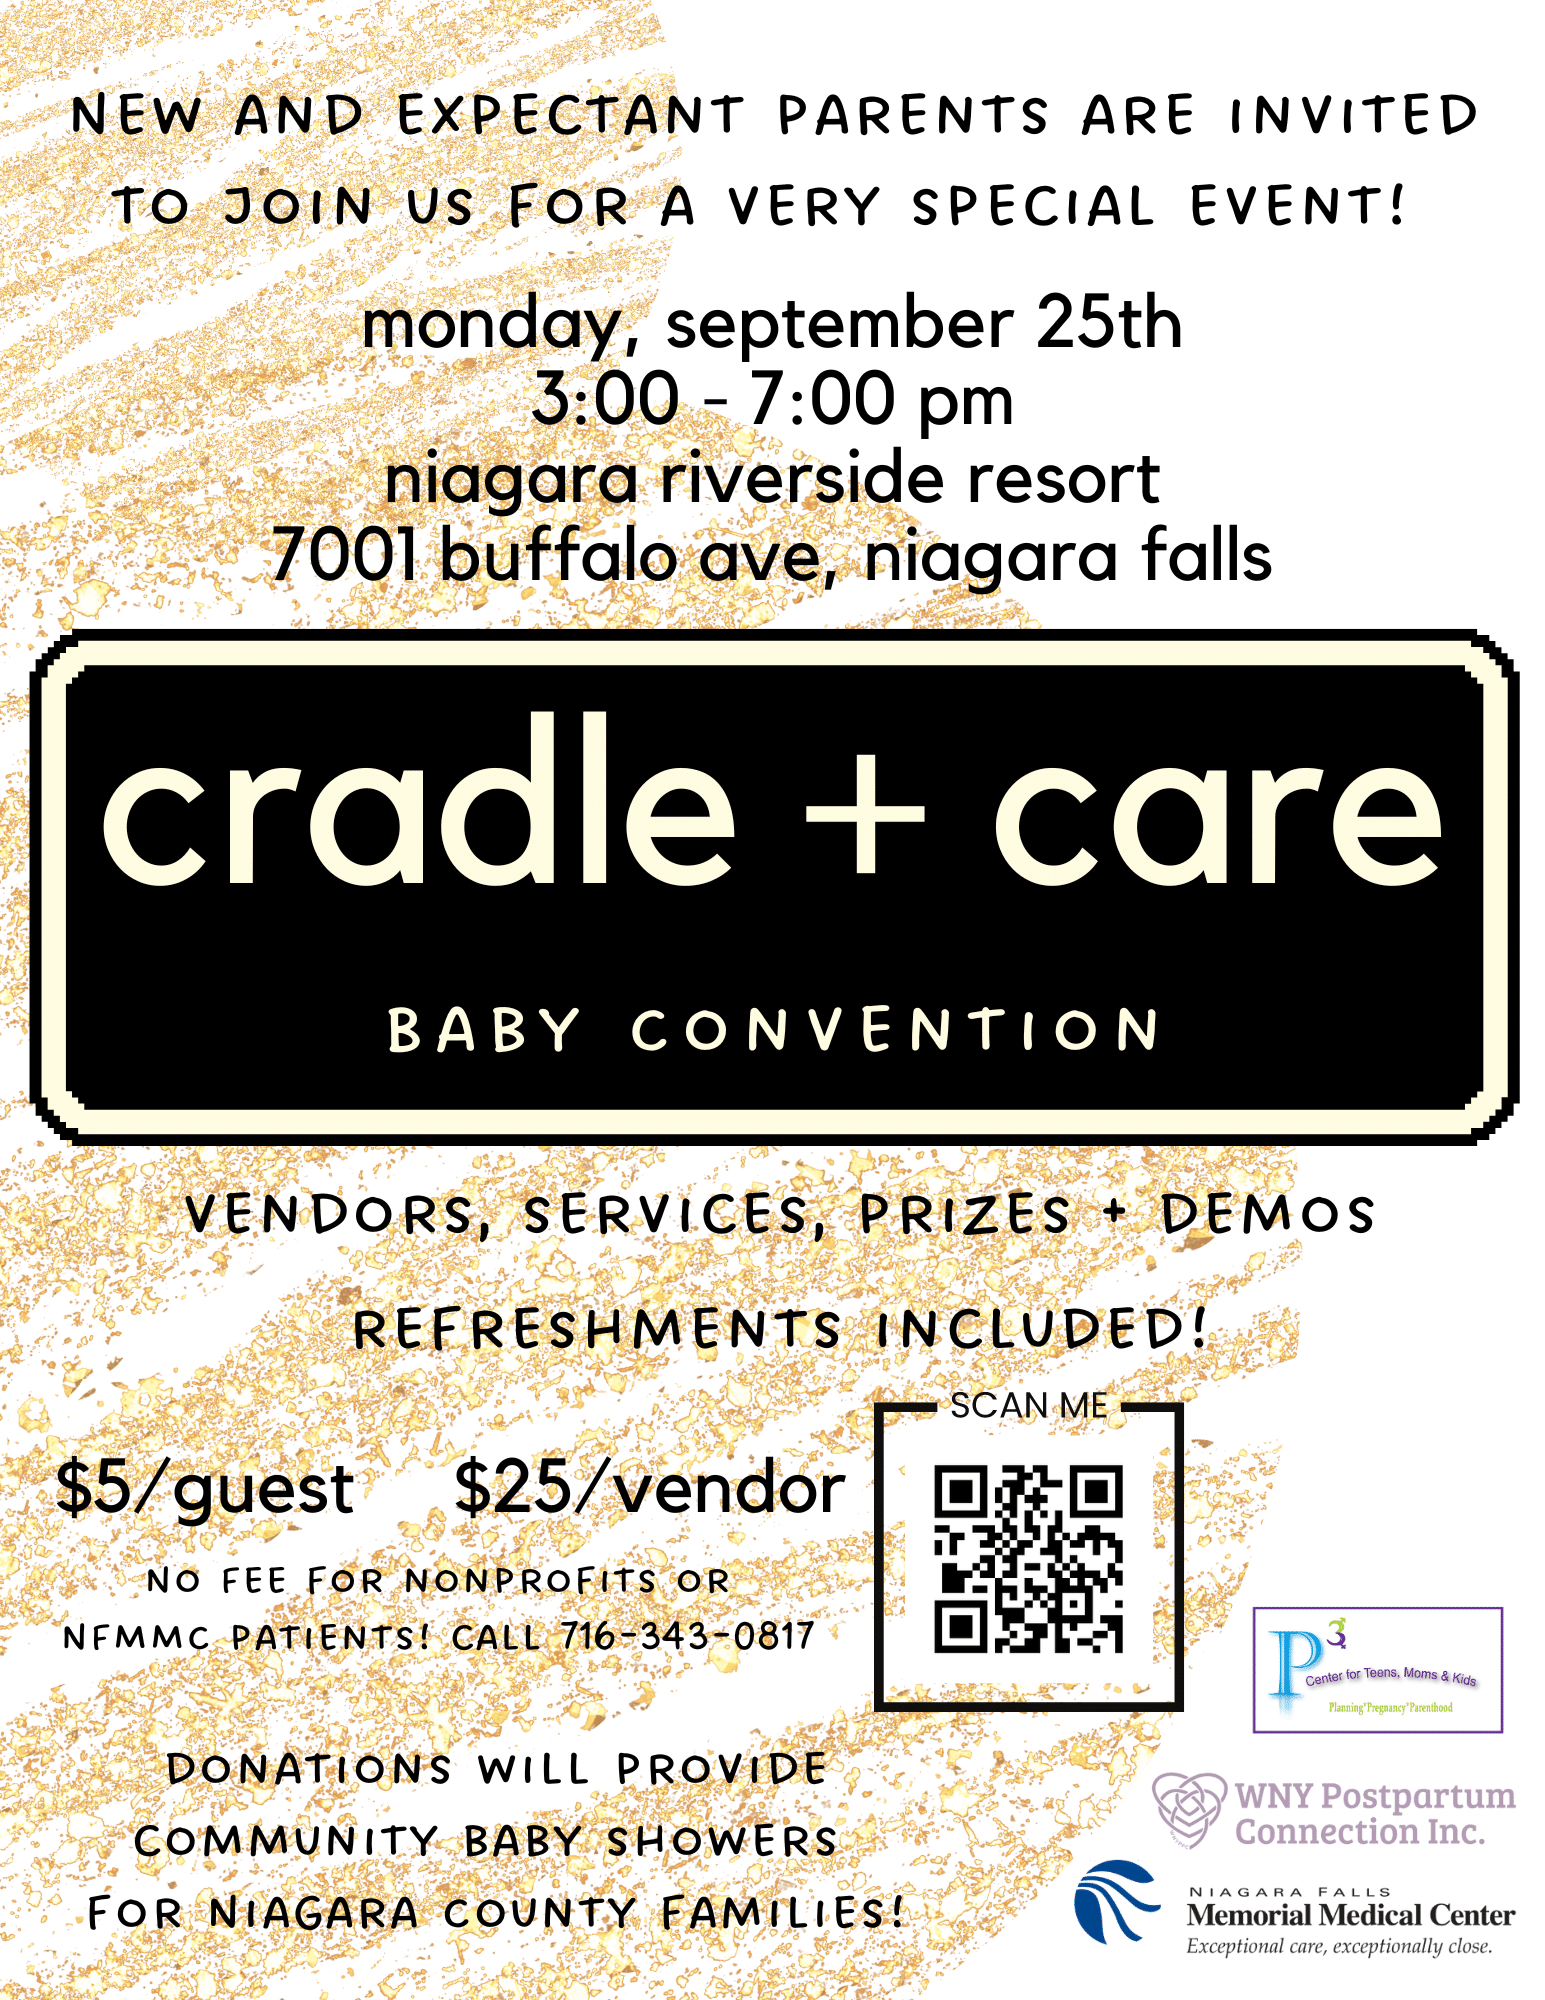 Niagara Falls Memorial Medical Center’s P3 Center to Host Cradle + Care Convention for Expectant and New Parents